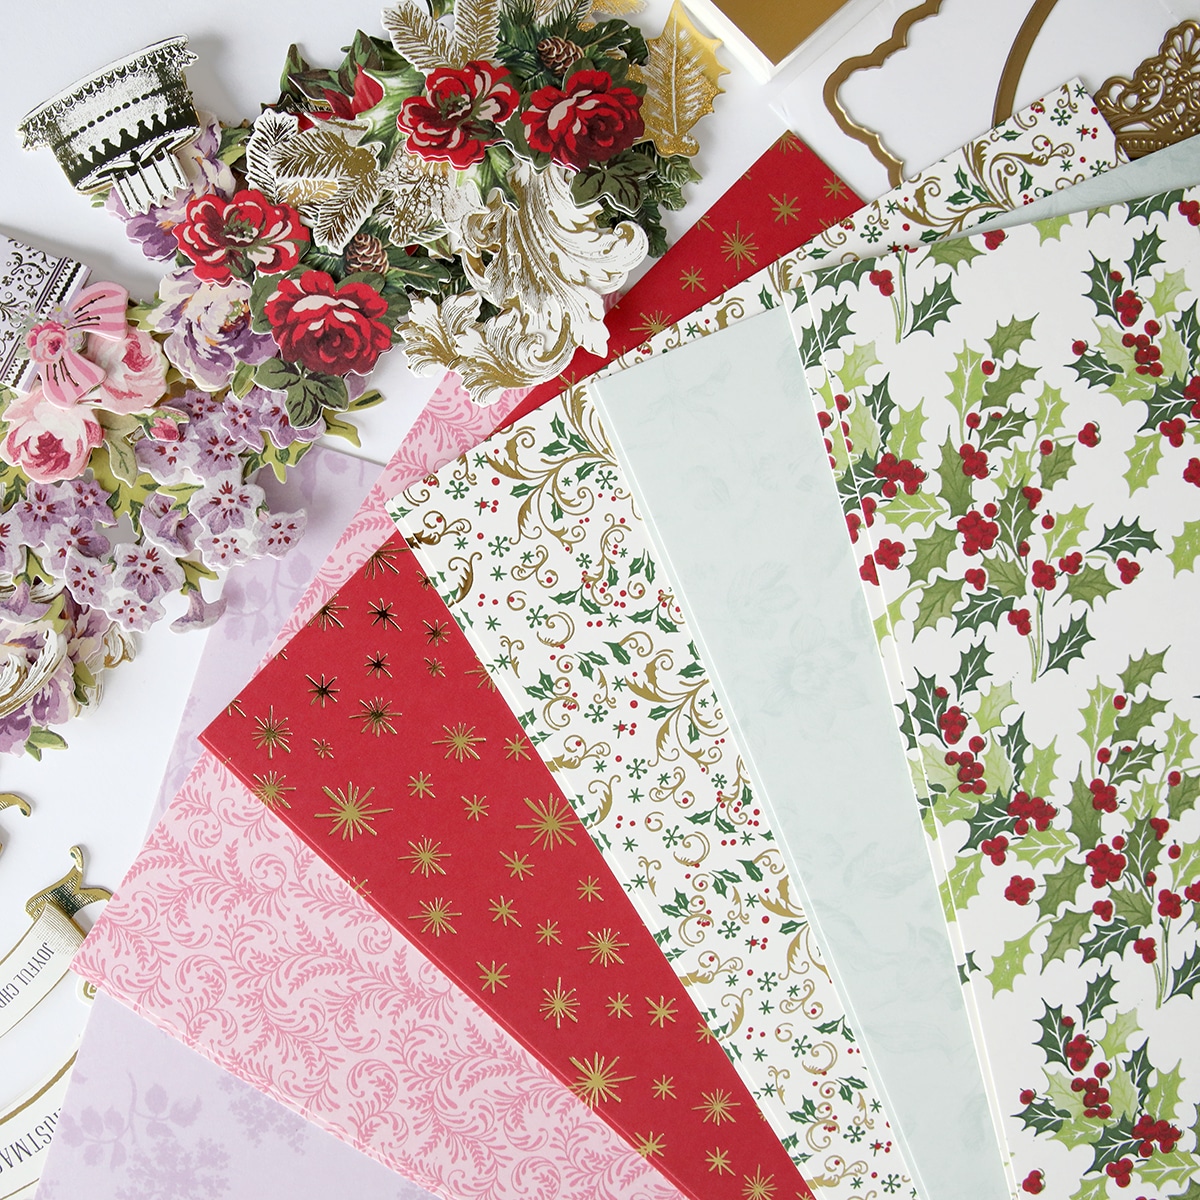 A variety of christmas papers and decorations are laid out on a table.